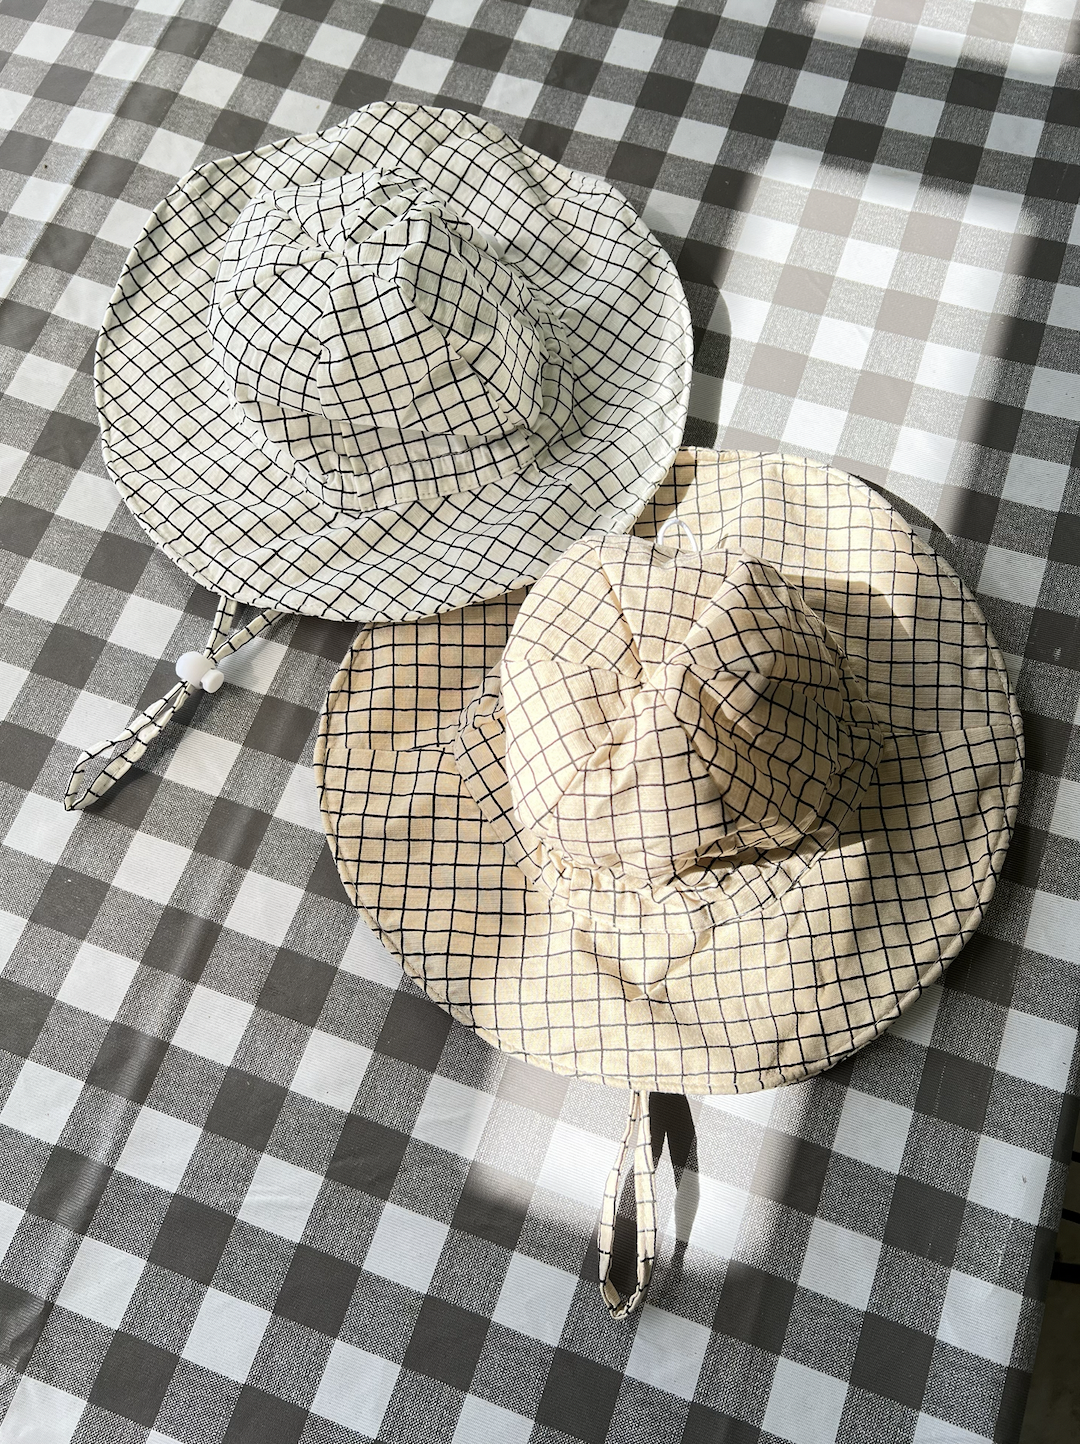 Two off the grid hats in latte and white are laid flat on a picnic check blanket